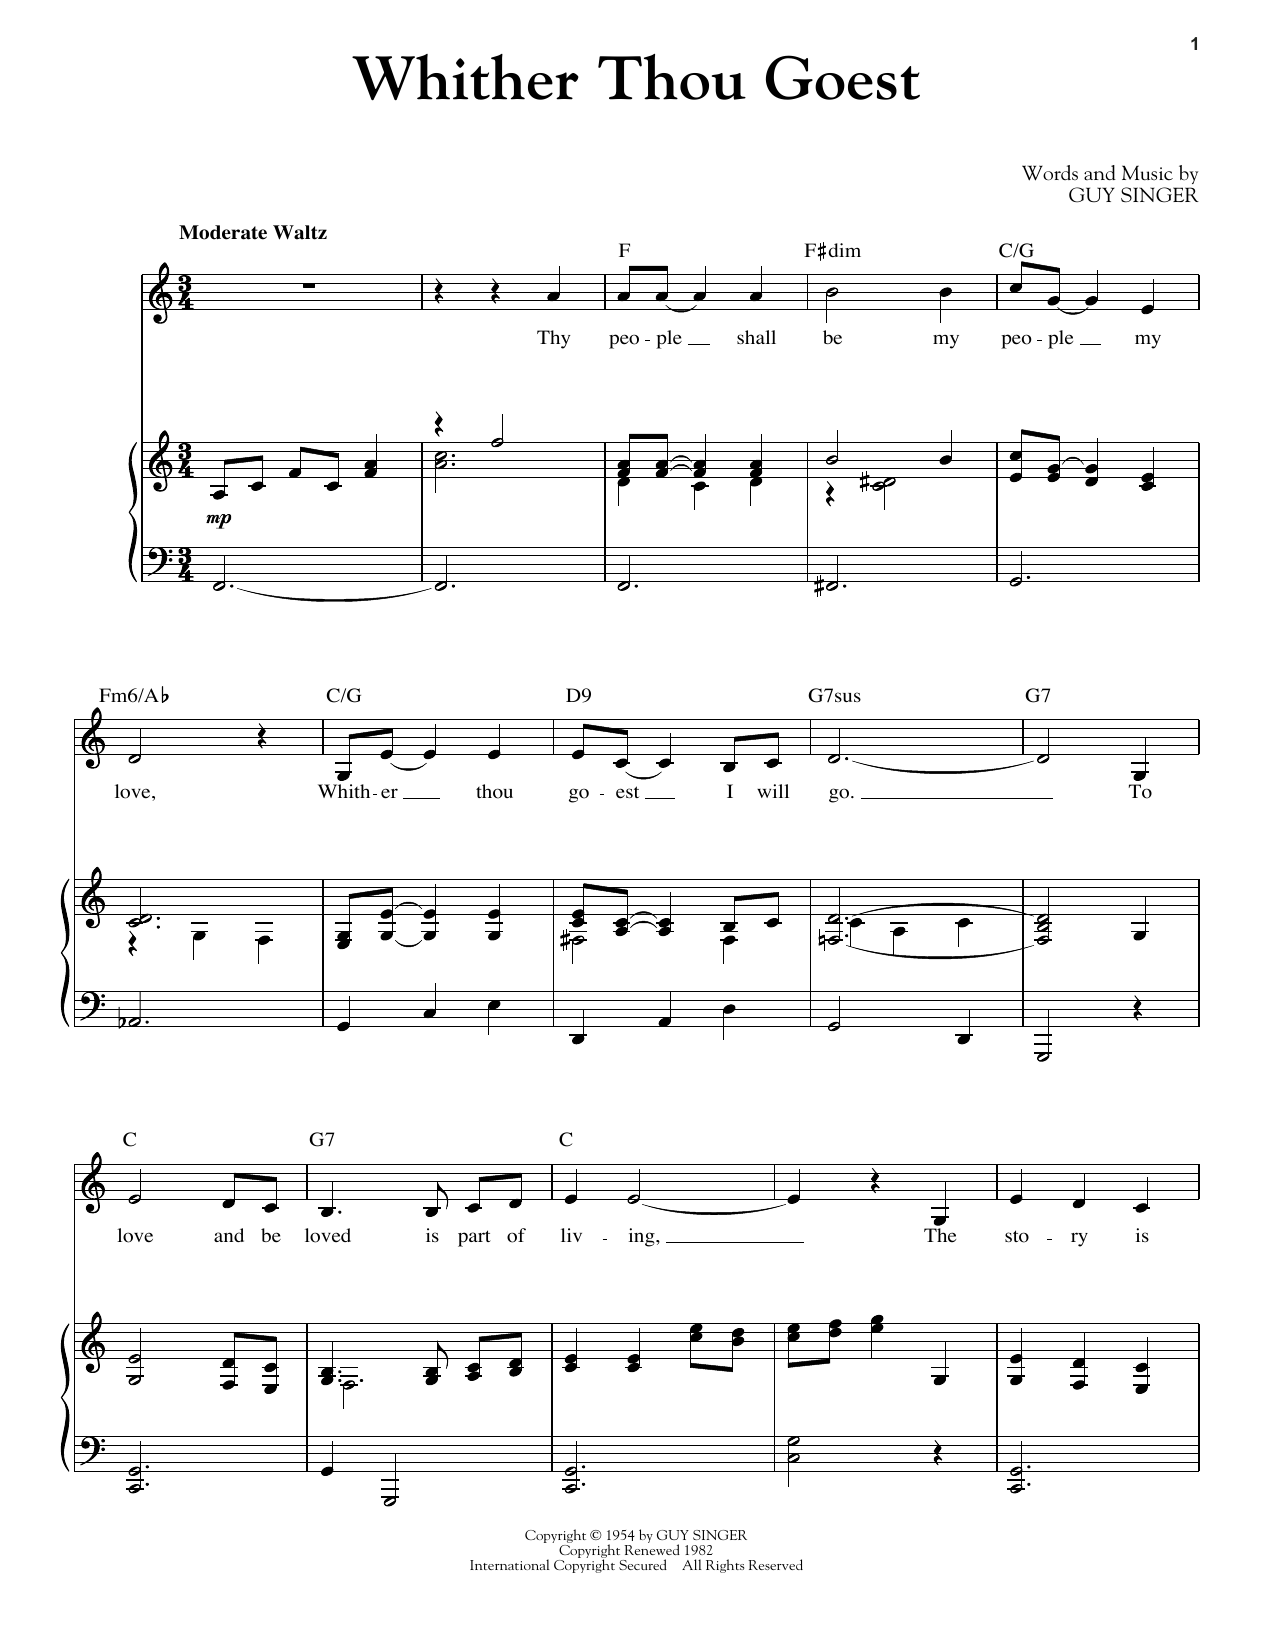 Download Guy Singer Whither Thou Goest Sheet Music